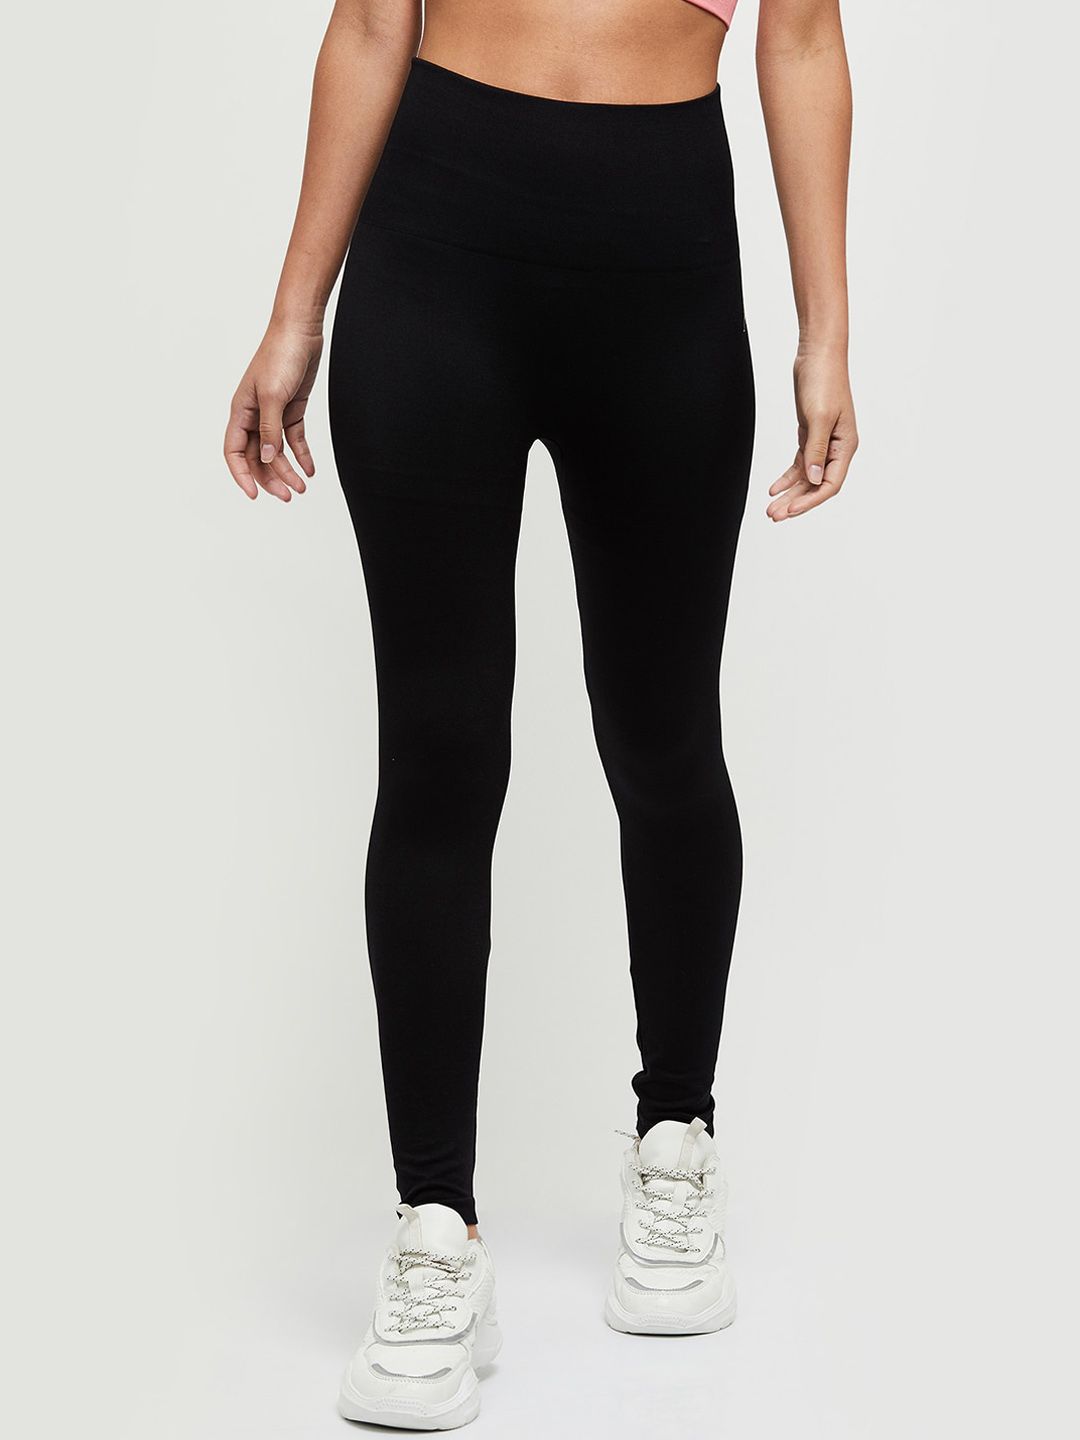 max Women Black Solid  polyester Tights Price in India